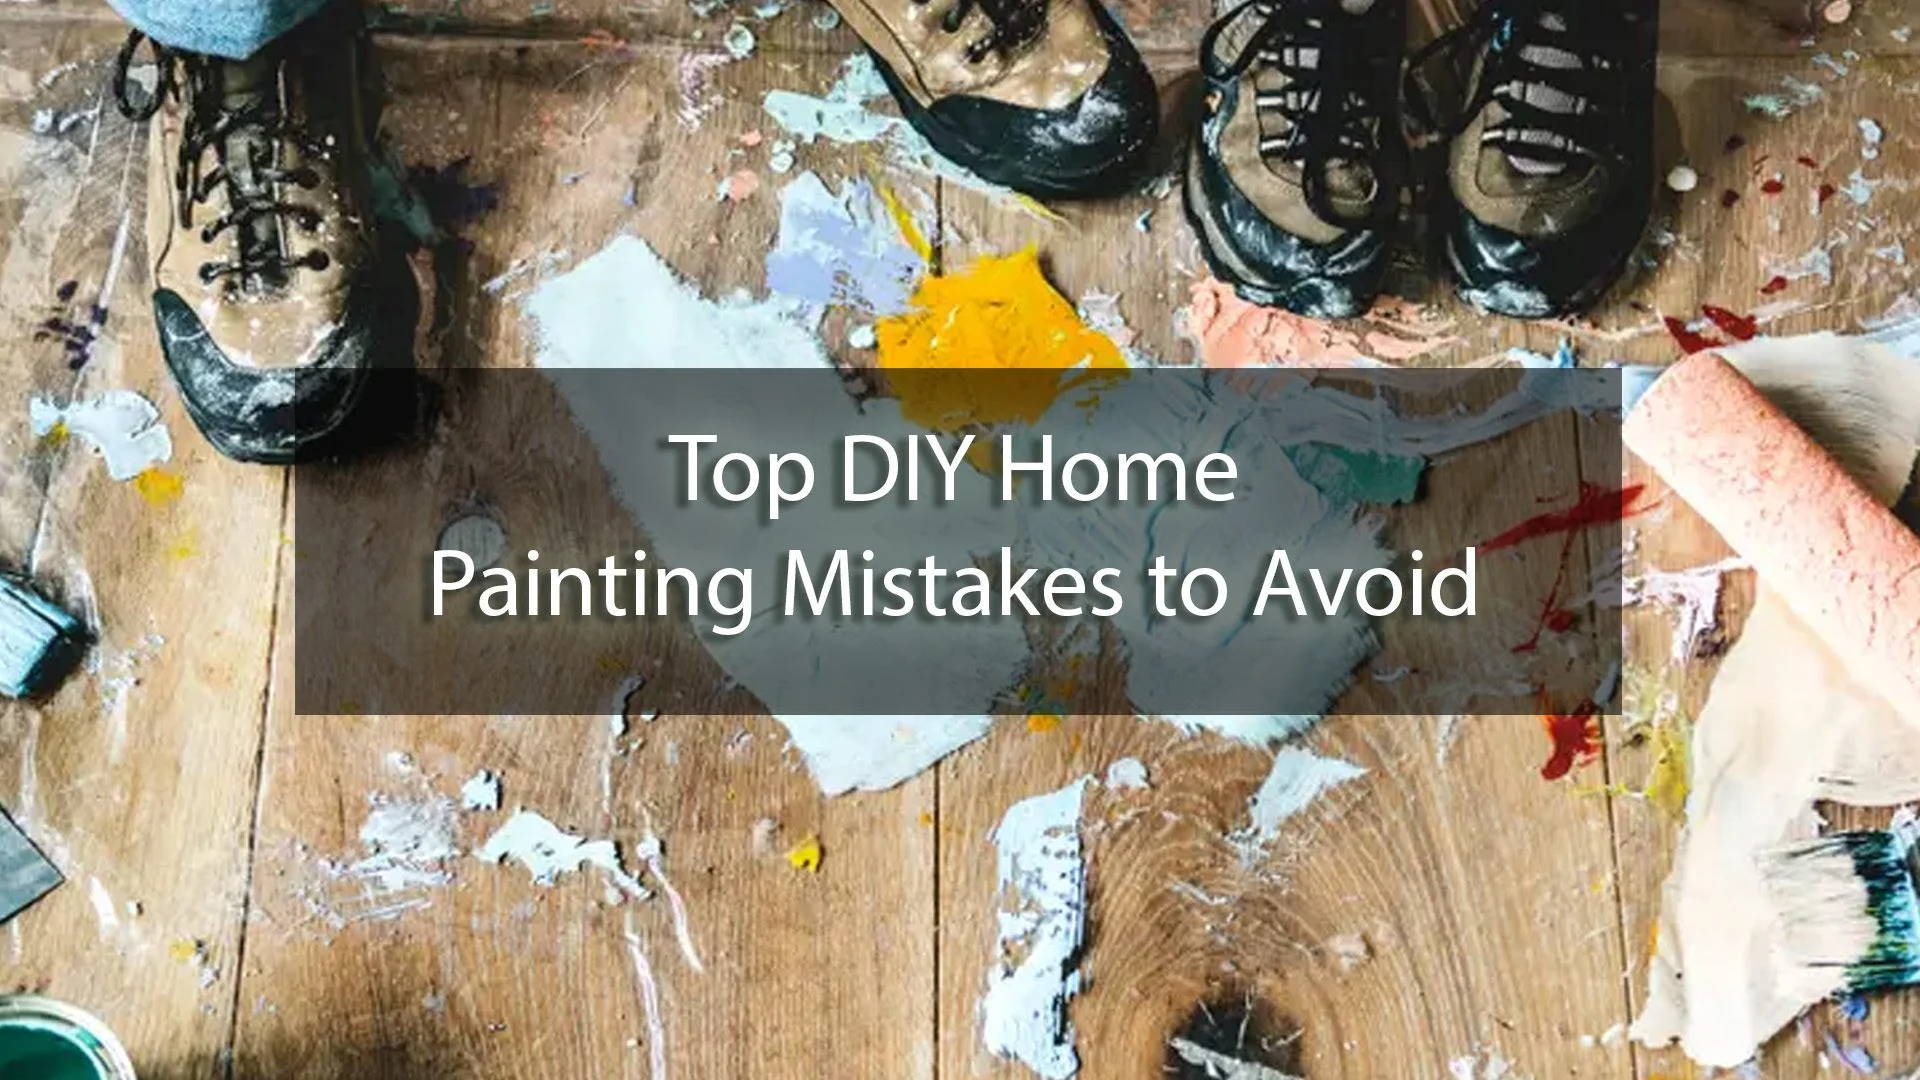 Top DIY Home Painting Mistakes to Avoid cover